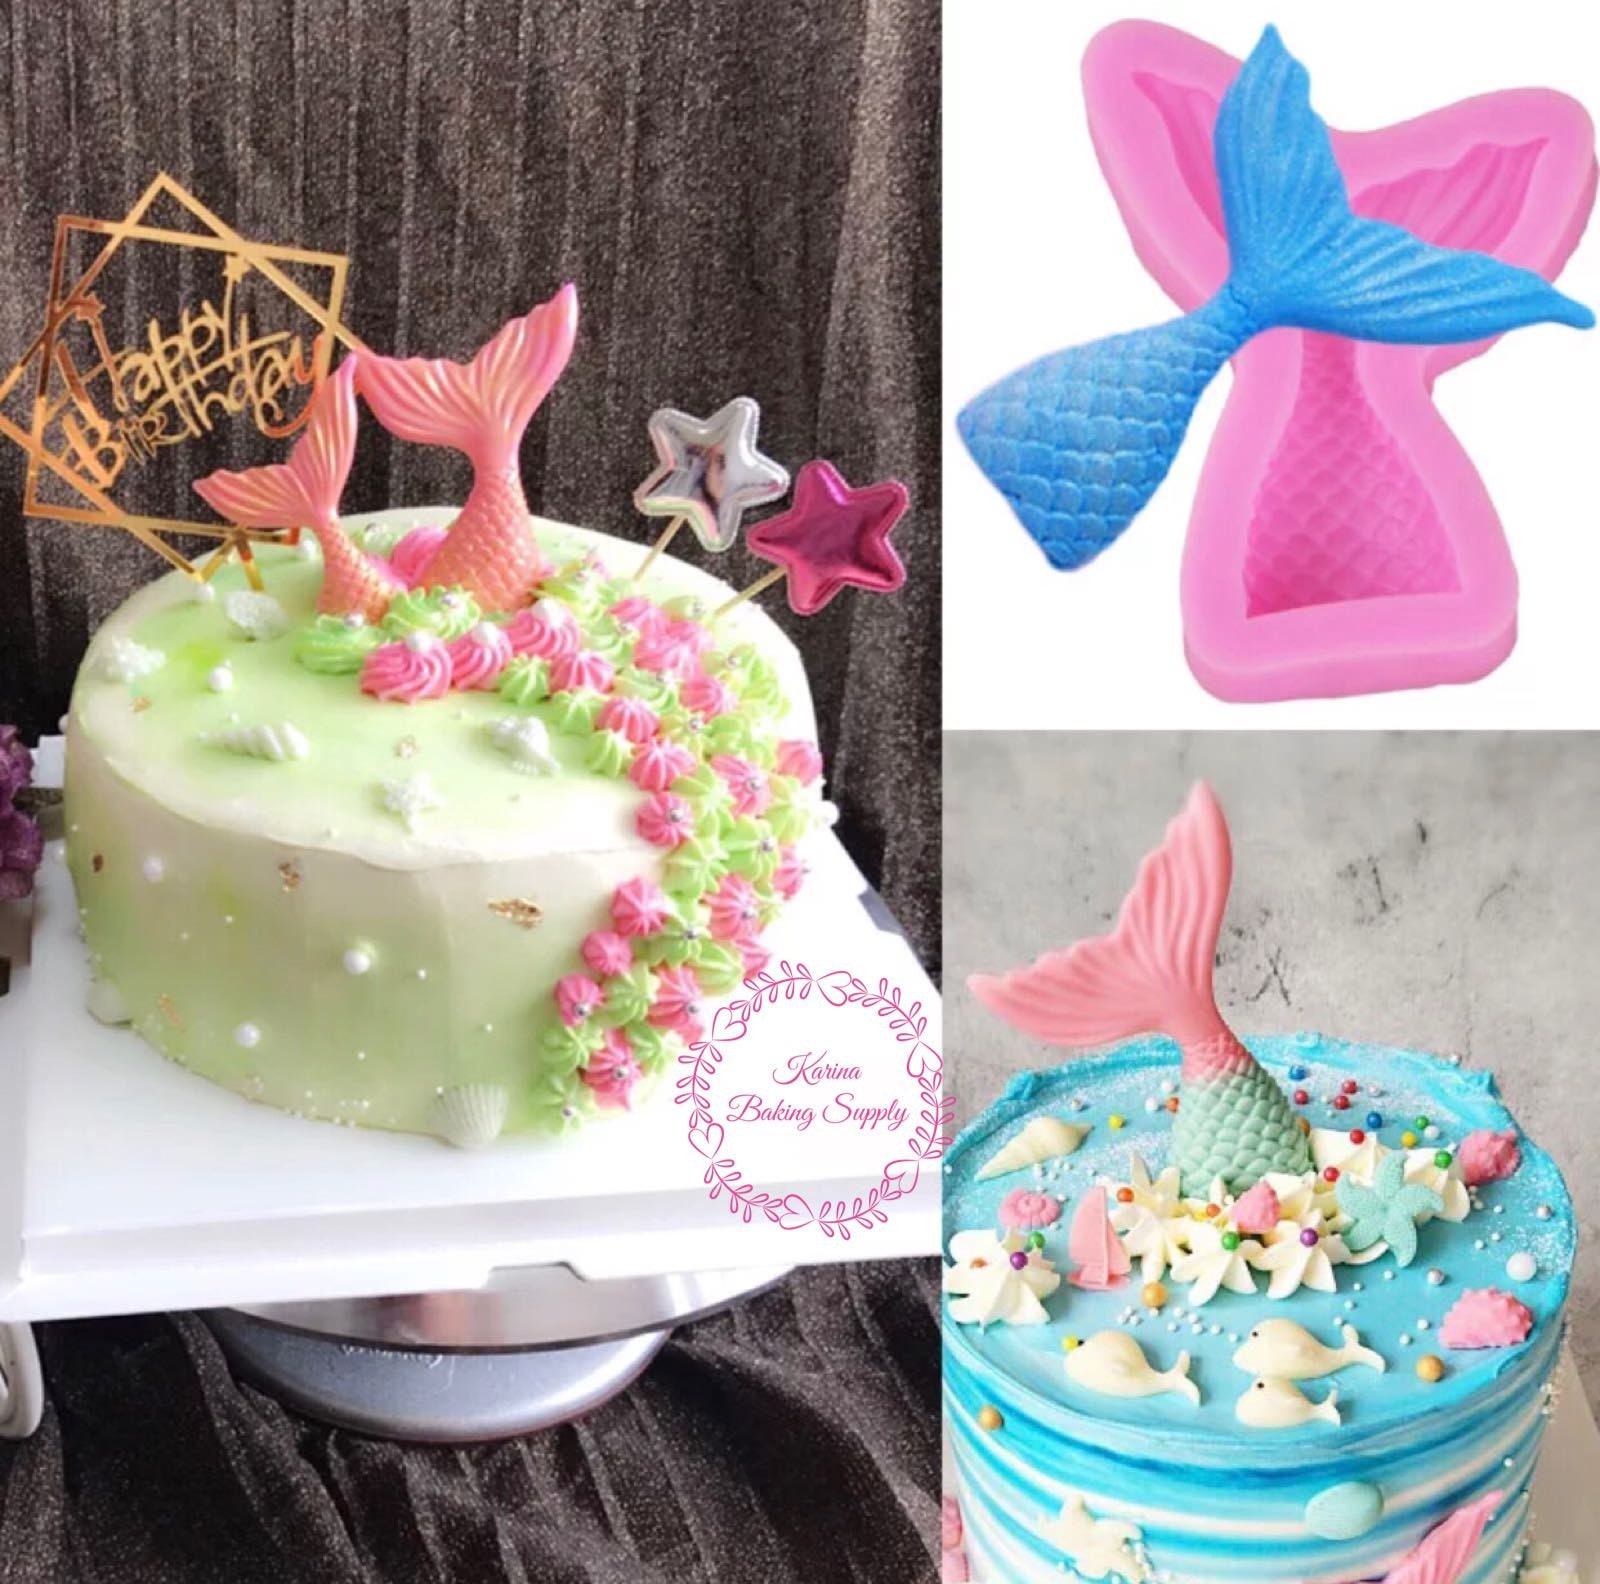 EXCEART Silicone Mermaid Fondant Mold 3D Mould Cake Topper DIY Baking Tool for Sugarcraft Chocolate Candle Soap Making 